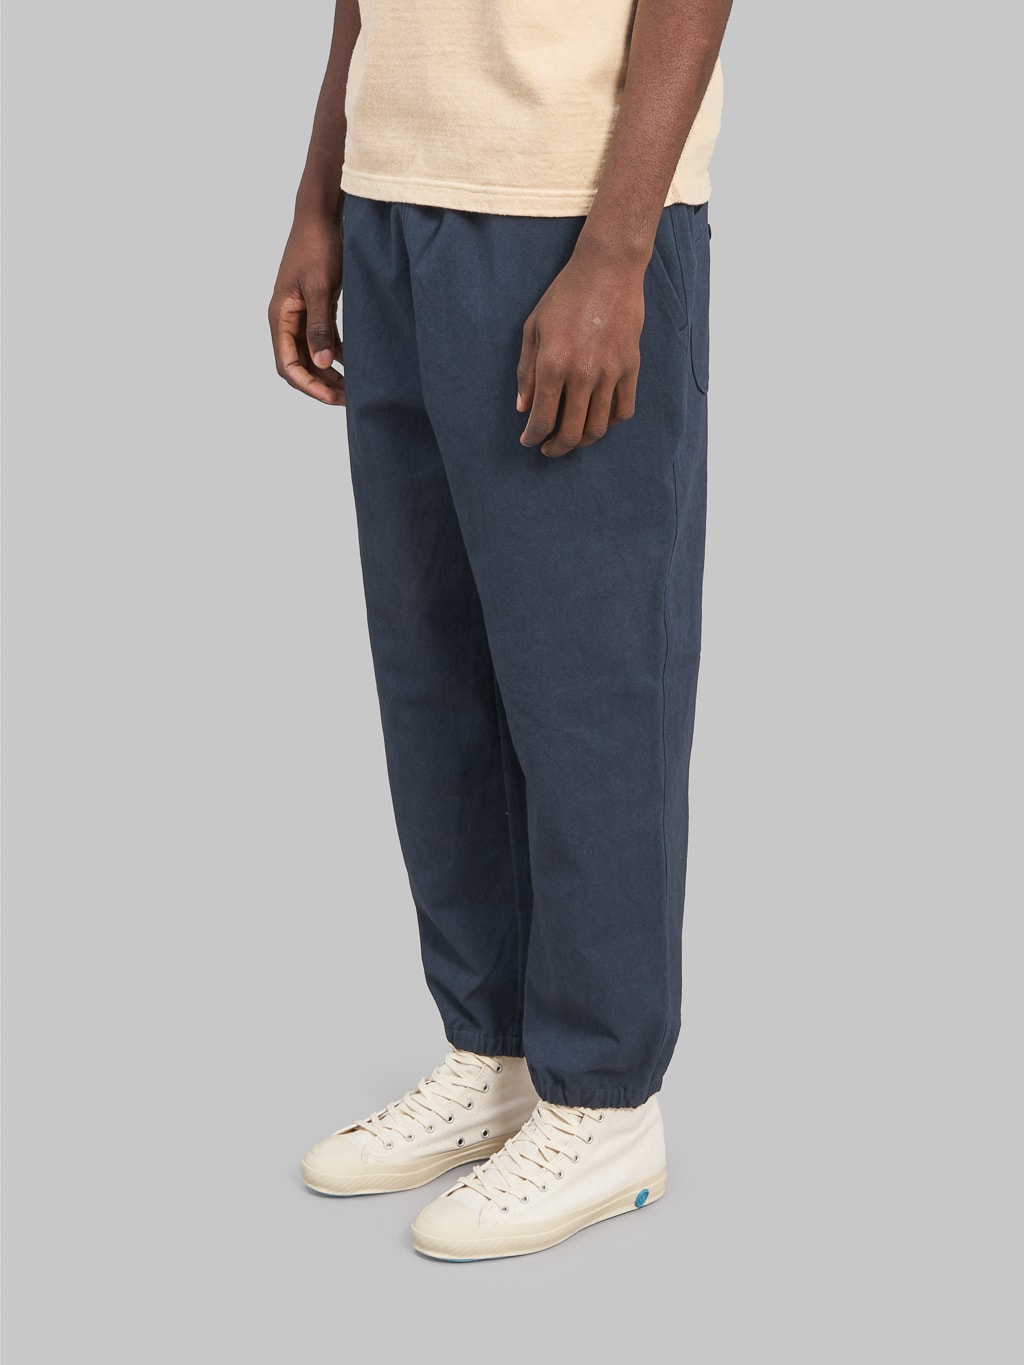 Jackman Canvas Rookie Pants Navy sulfur dyed side